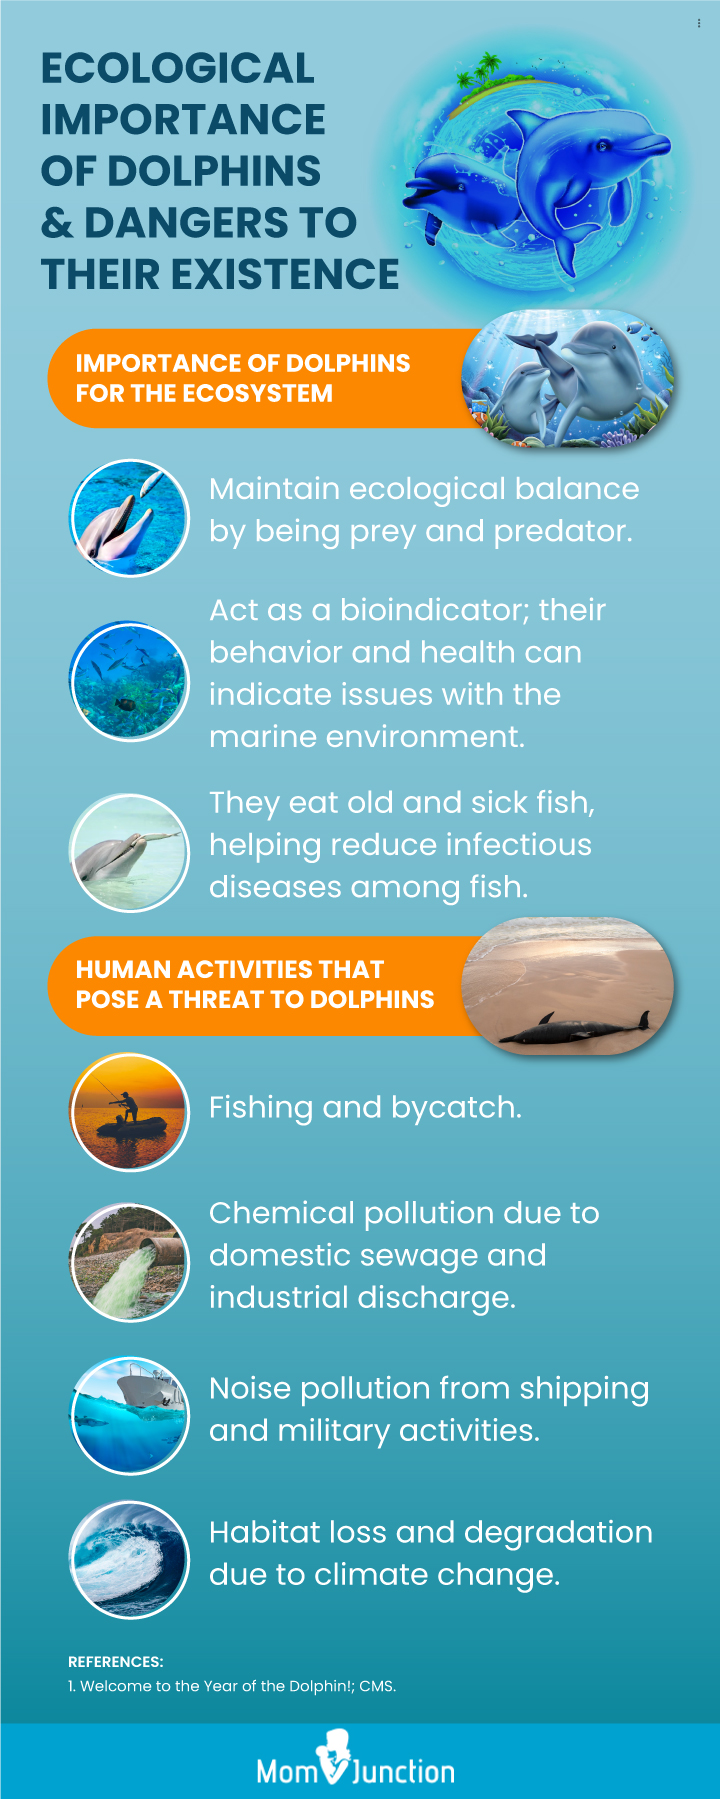 ecological importance of dolphins and dangers to their existence (infographic)